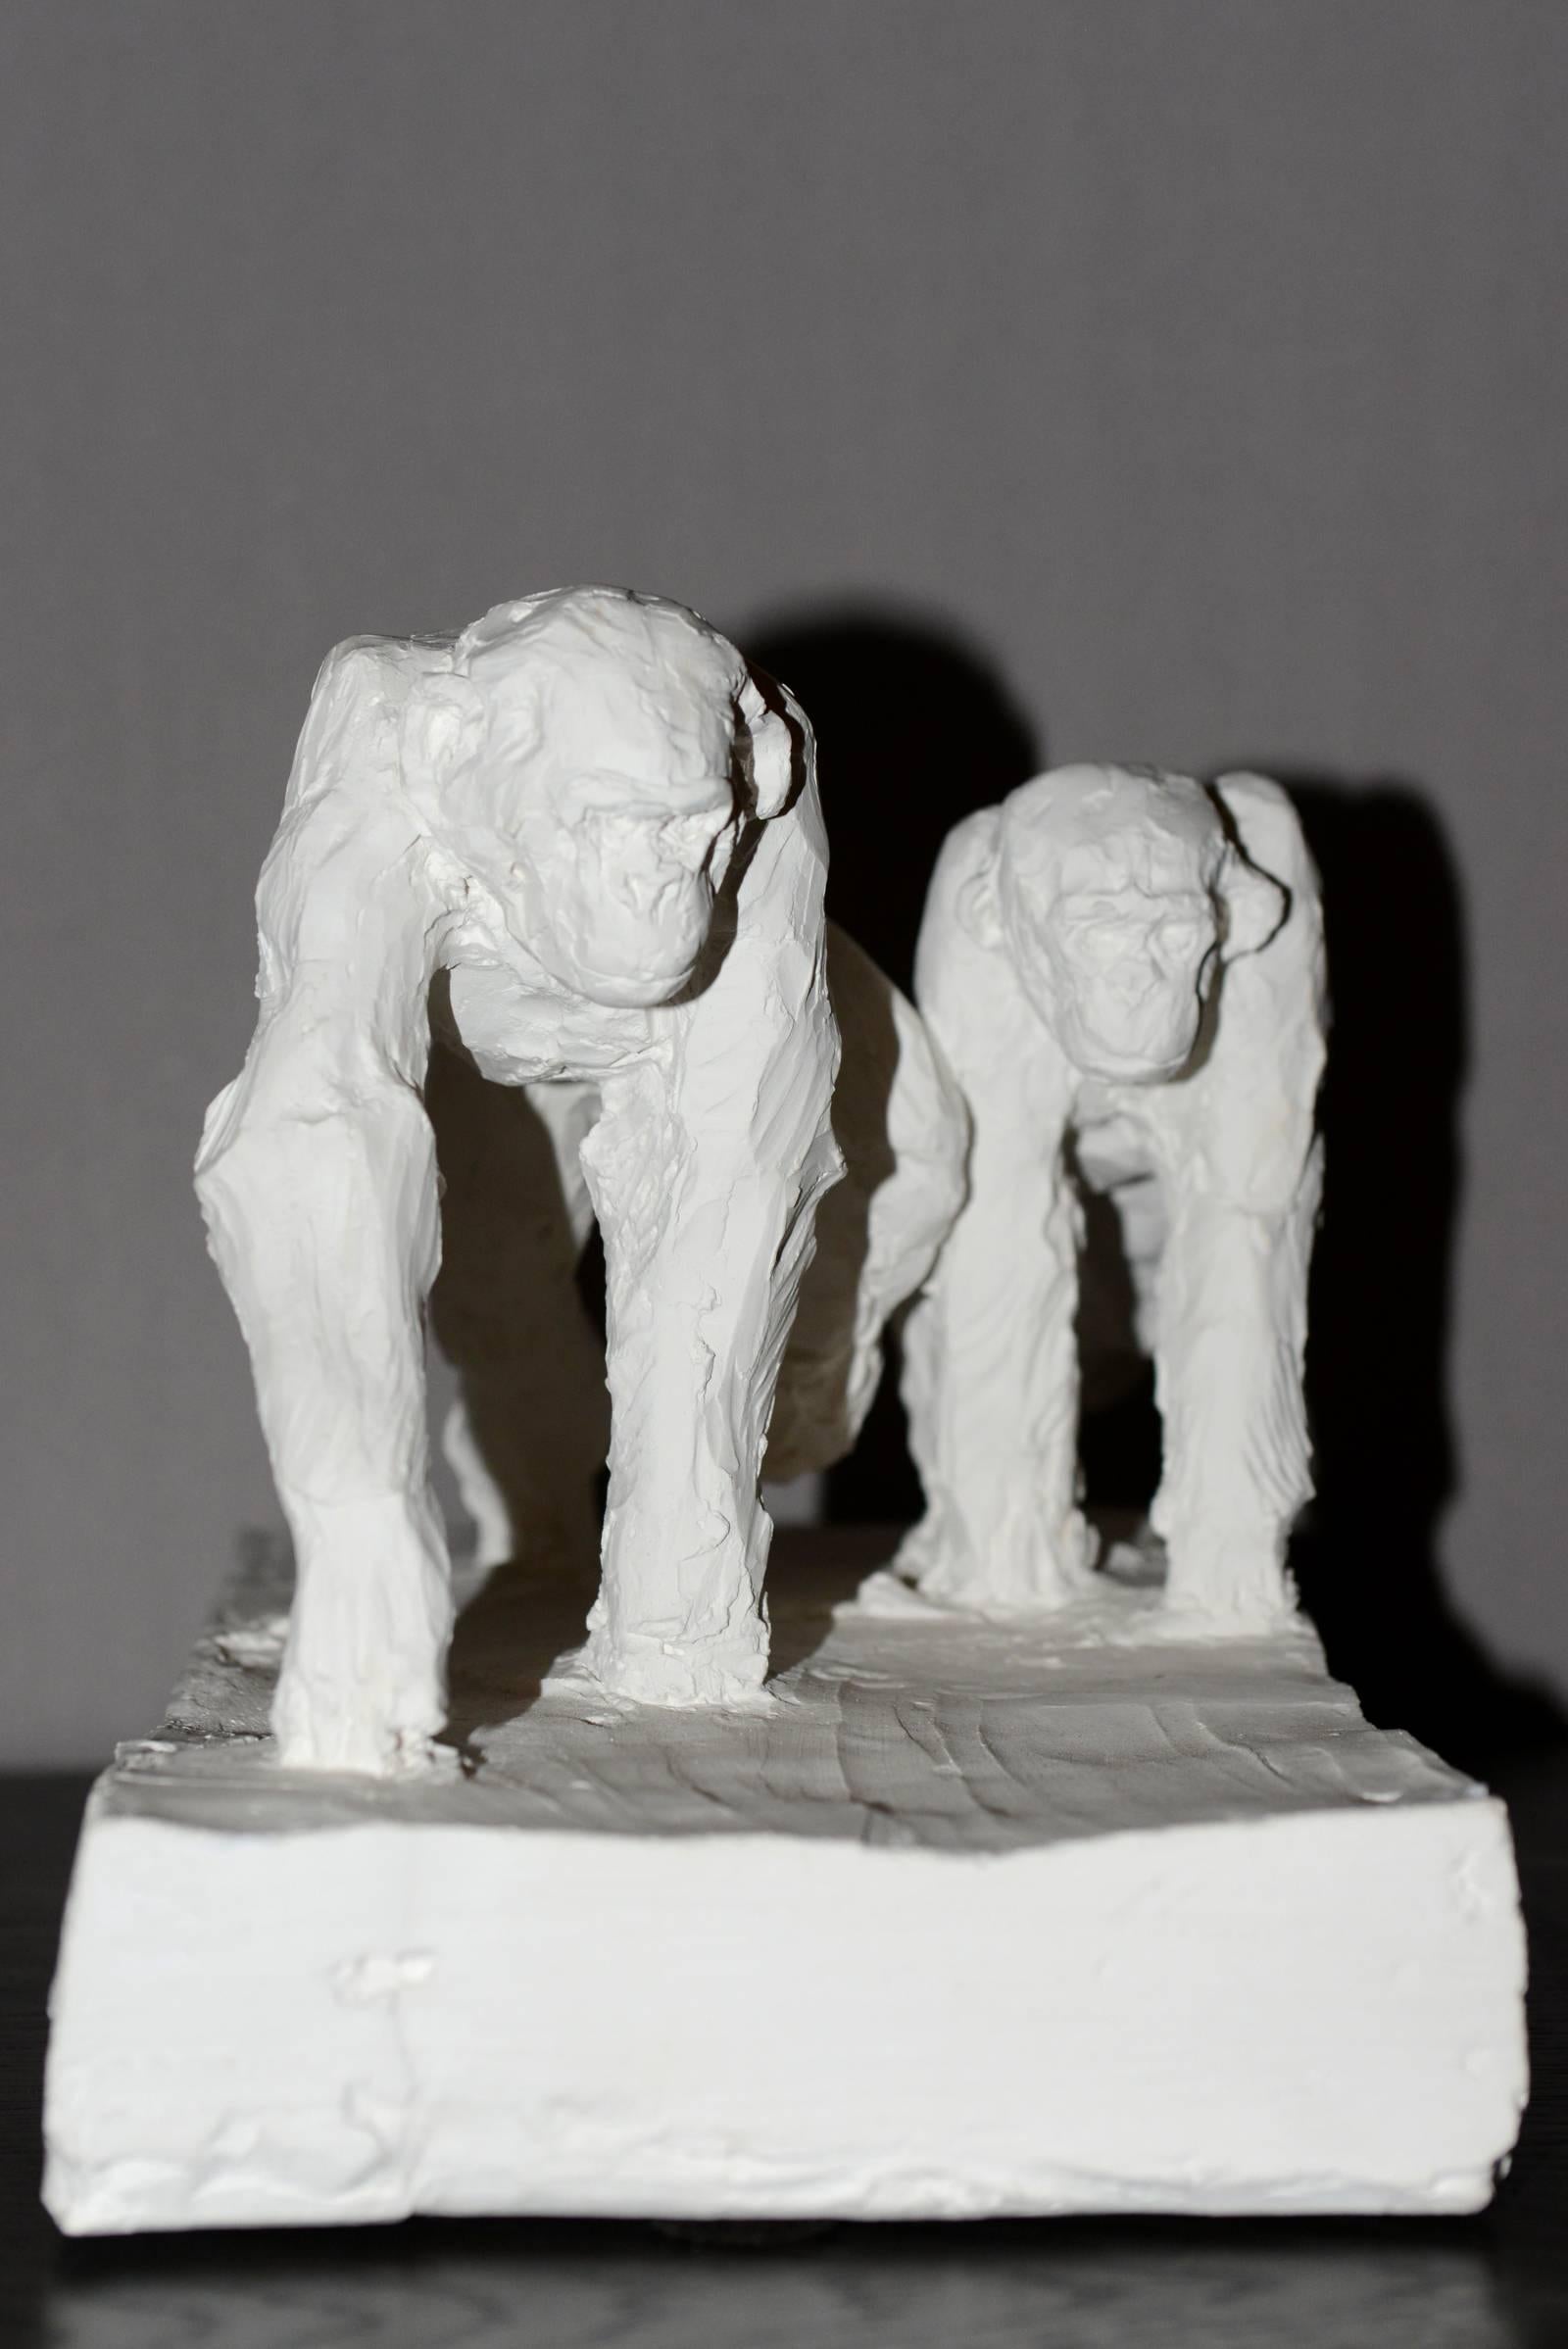 French Sculpture Double Chimpanzee in Plaster Limited Edition 30/50 by J.B Vandame 2015